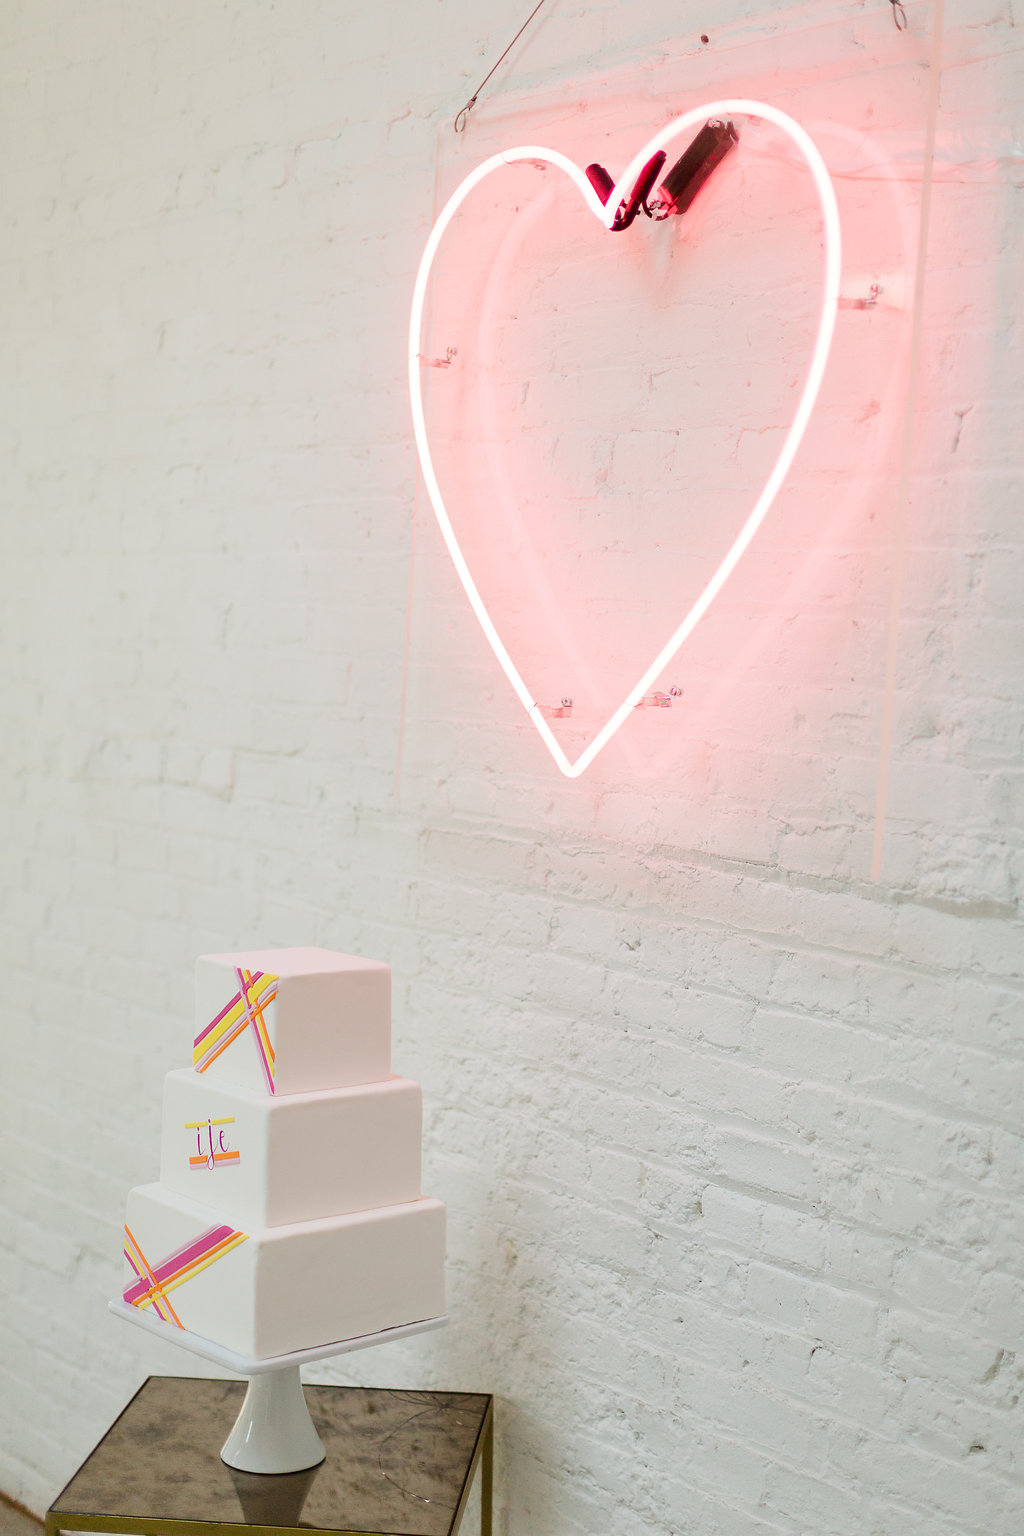 Modern Neon Wedding Cake / designed by Ashley Peraino + Ivey Weddings & Events / Cake by Erica O'Brien Cake Design / photo by Jessica Haley Photography